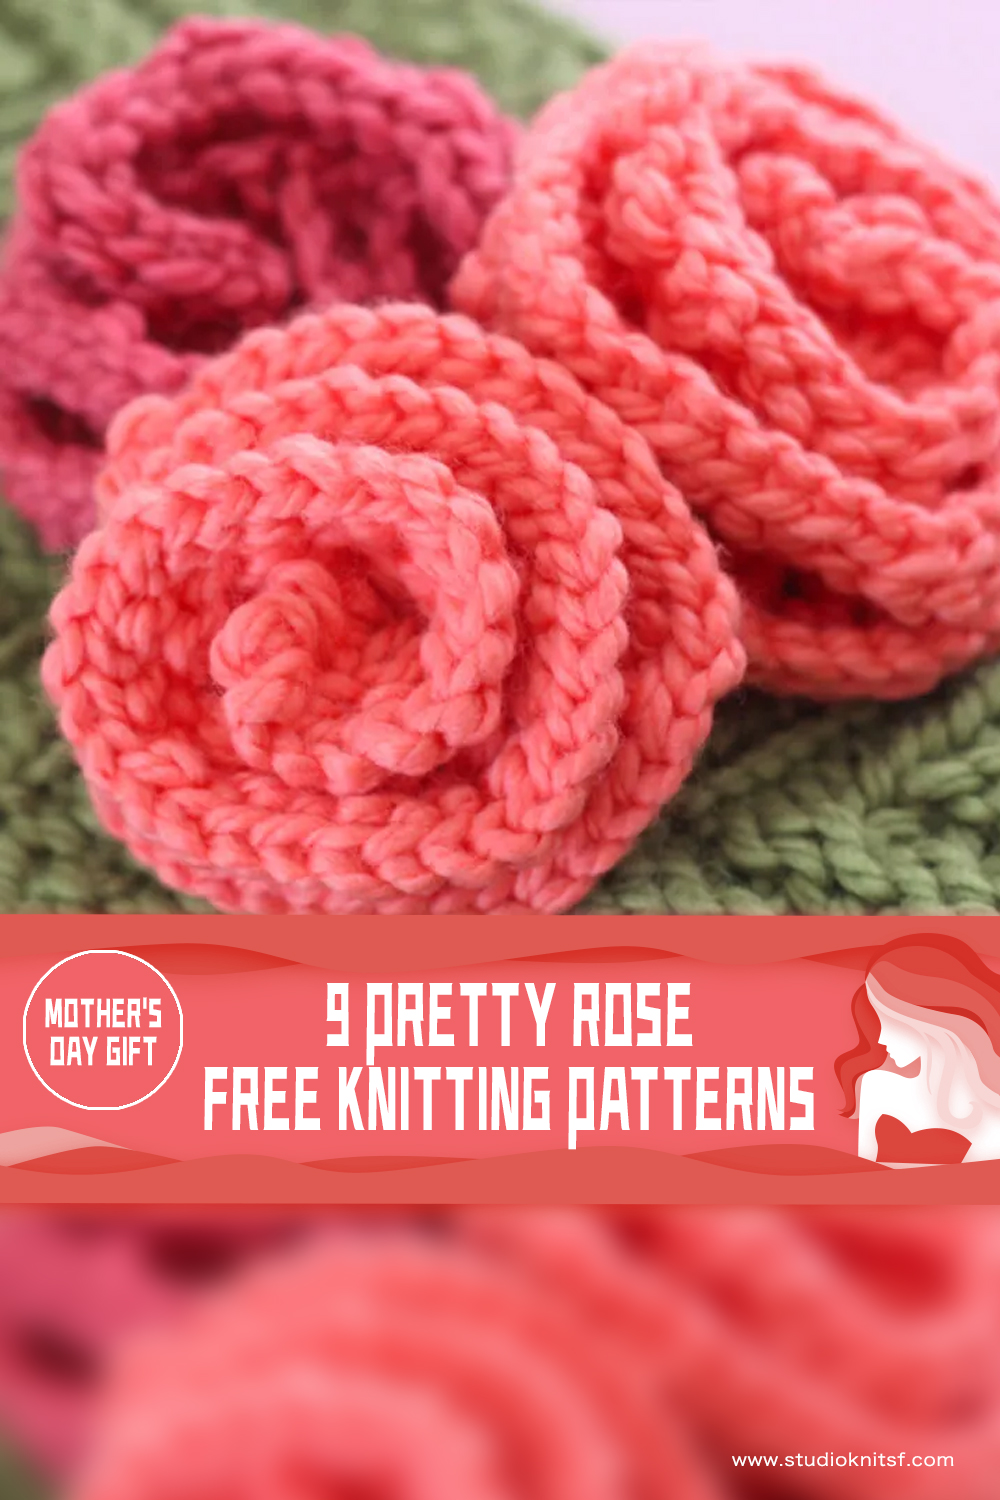 Mother's Day Gift - 9 Pretty Rose FREE Knitting Patterns